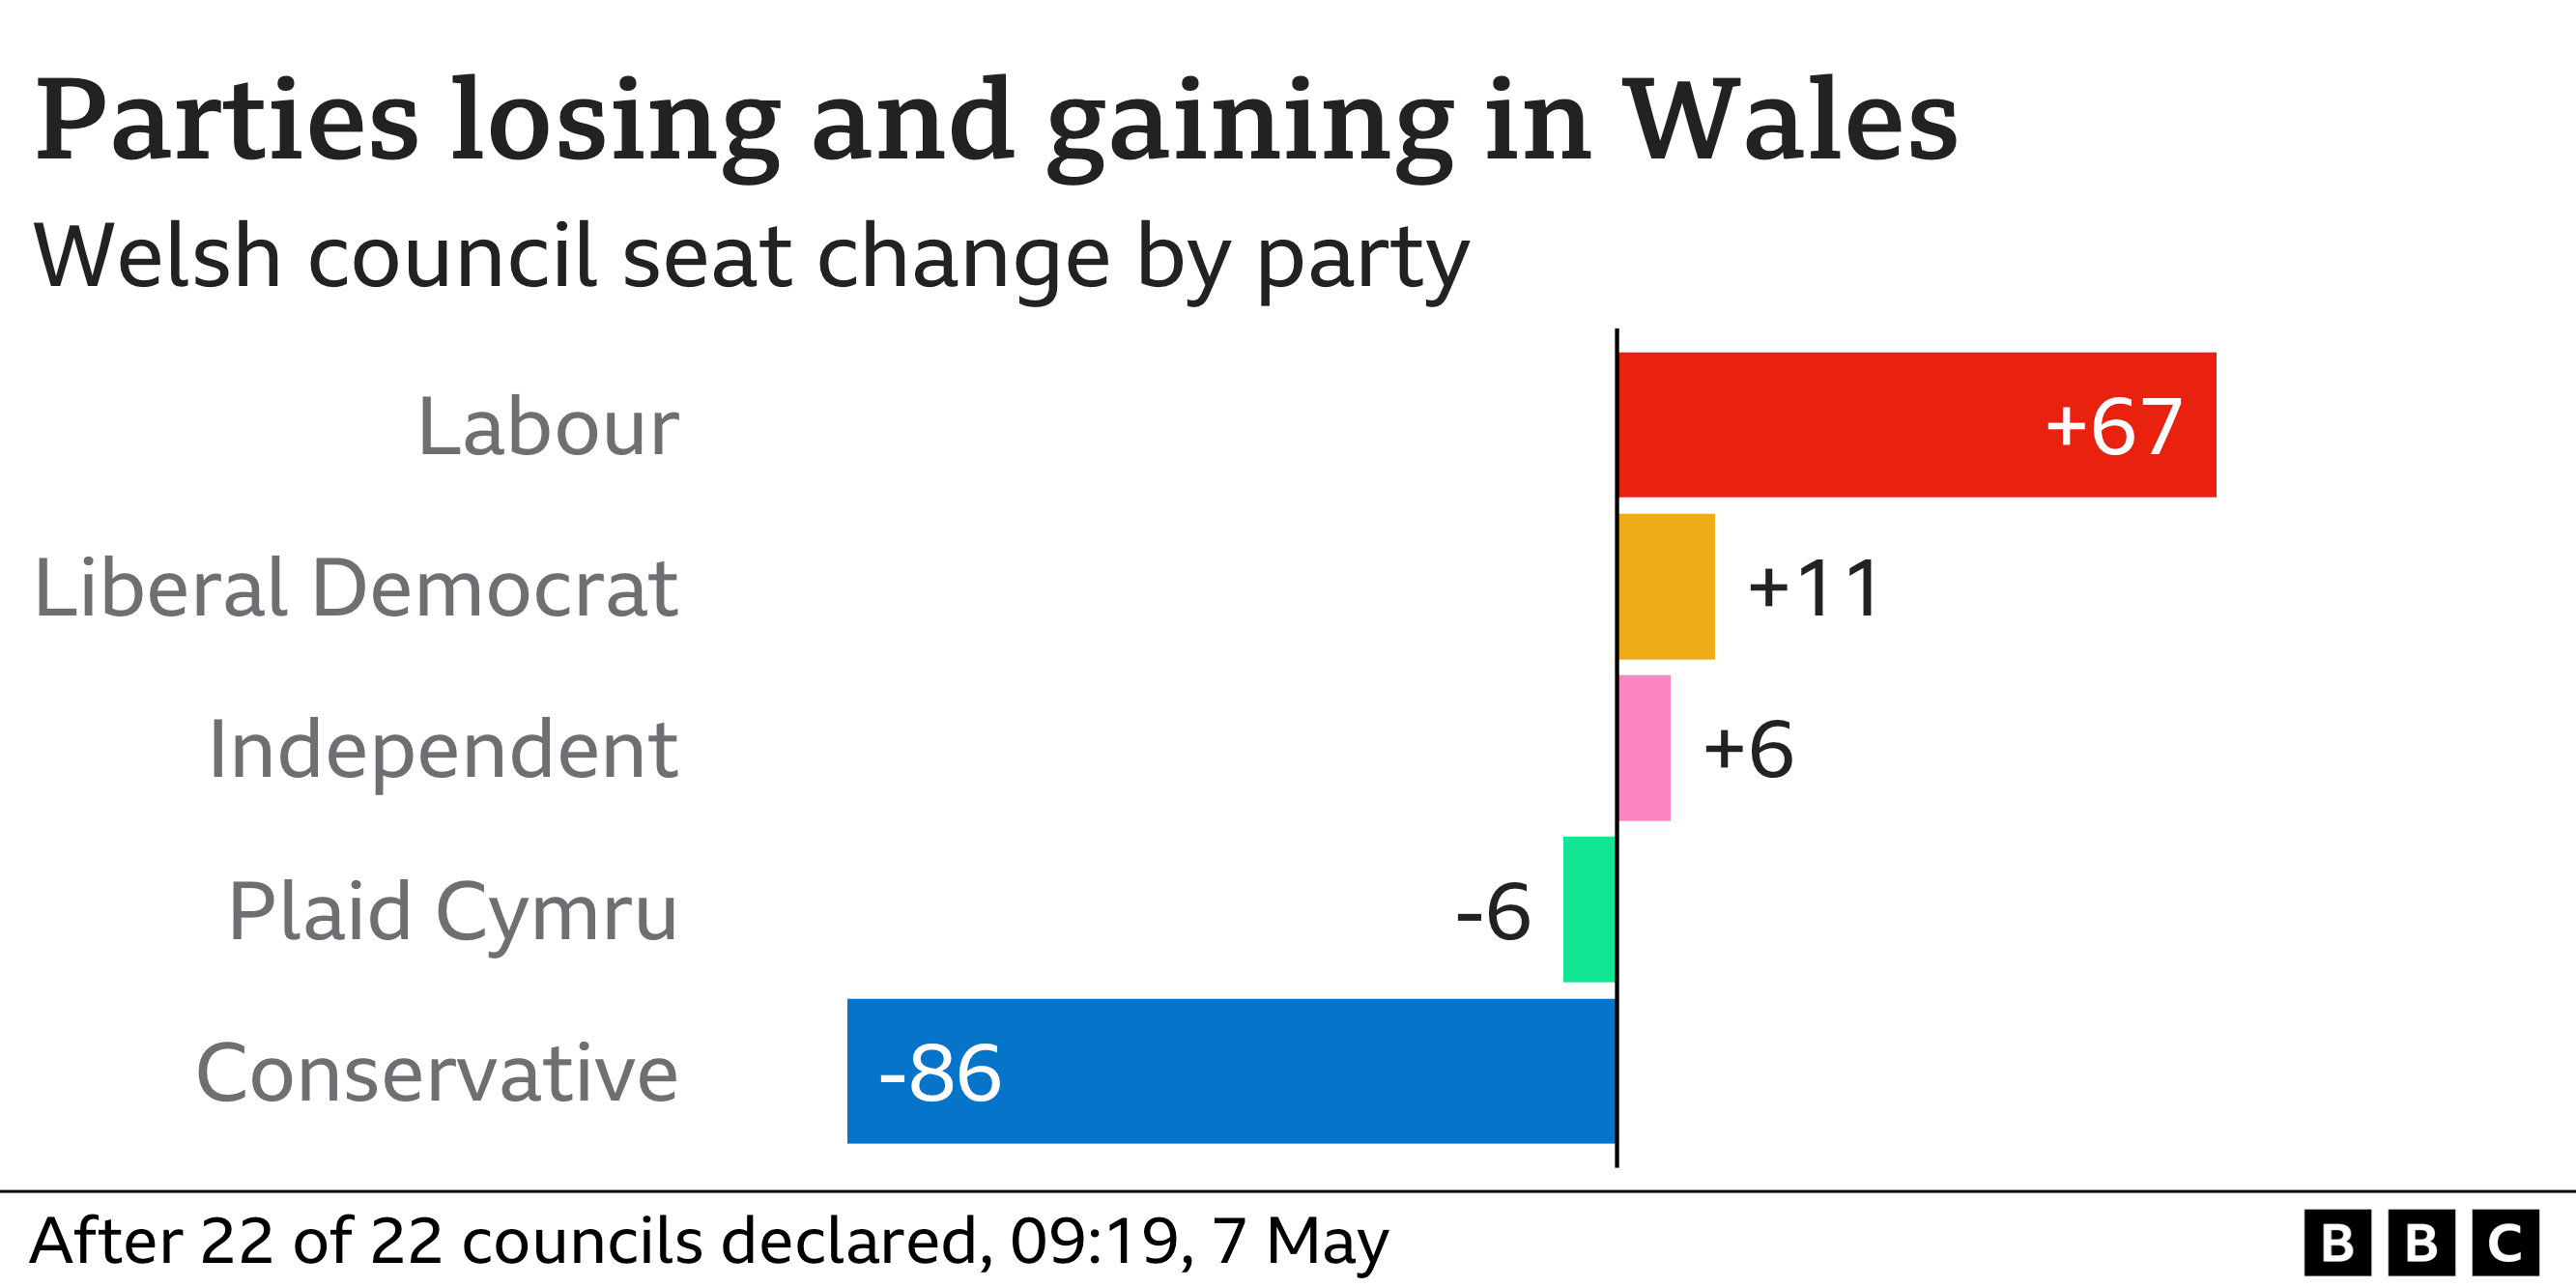 Chart showing change in the number of councillors for largest parties in Wales. Labour change 67, Liberal Democrat change 11, Independent change 6, Plaid Cymru change -6, Conservative change -86